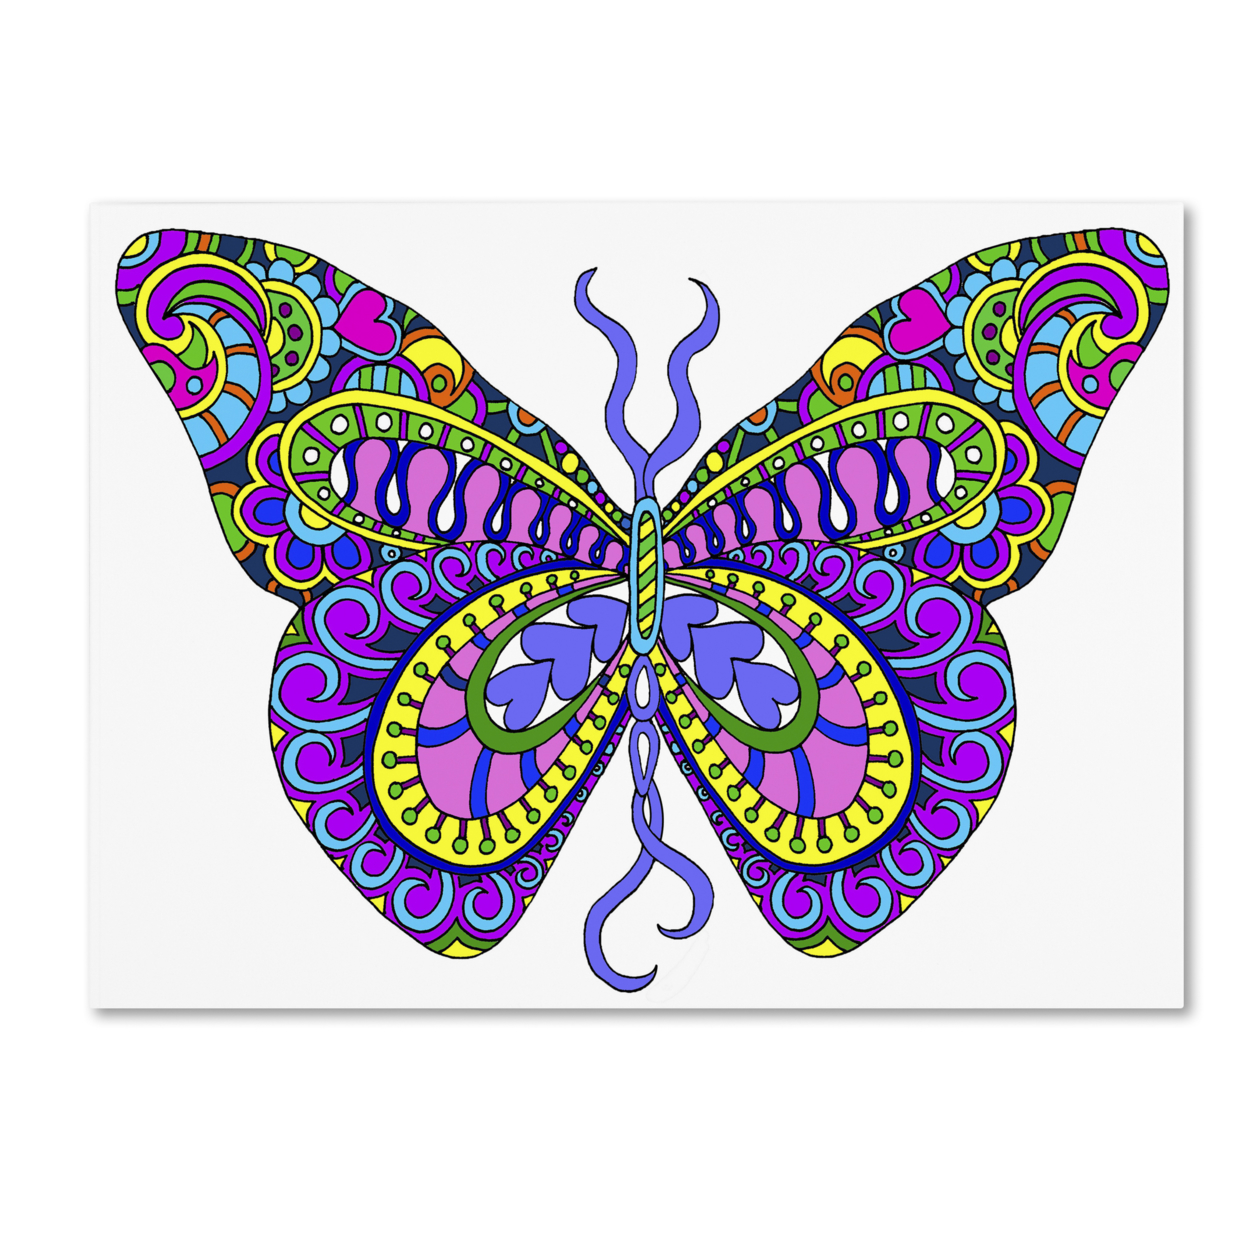 Kathy G. Ahrens 'Bashful Garden Butterfly Blooming' Canvas Wall Art 35 X 47 Inches